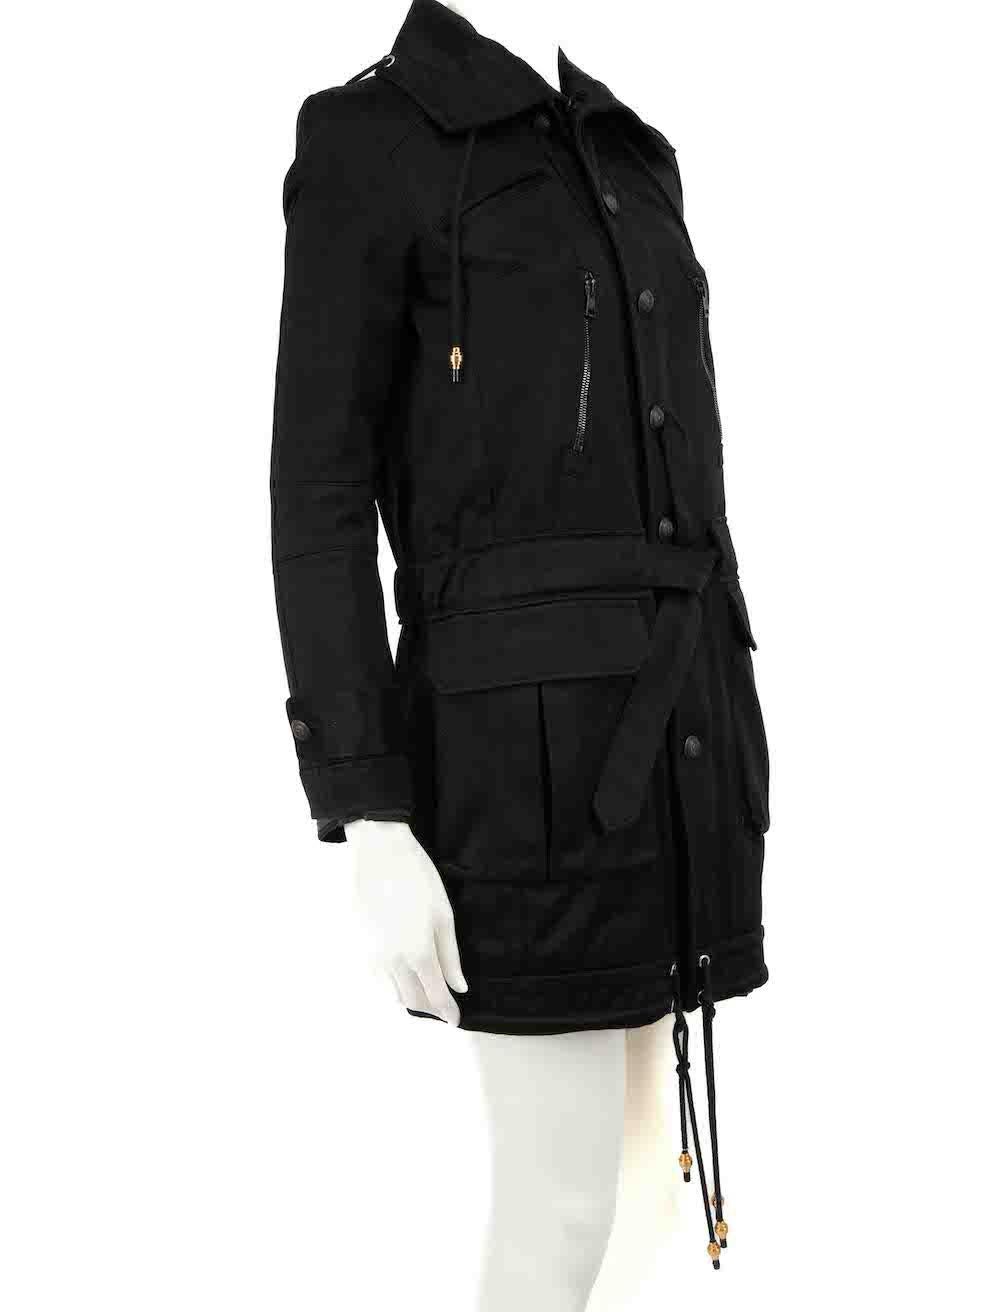 CONDITION is Very good. Minimal wear to coat is evident. Minimal wear to the centre-front button fastening with discolouration to the placket on this used Balenciaga designer resale item.
 
Details
Black
Cotton
Trench coat
Zip and button